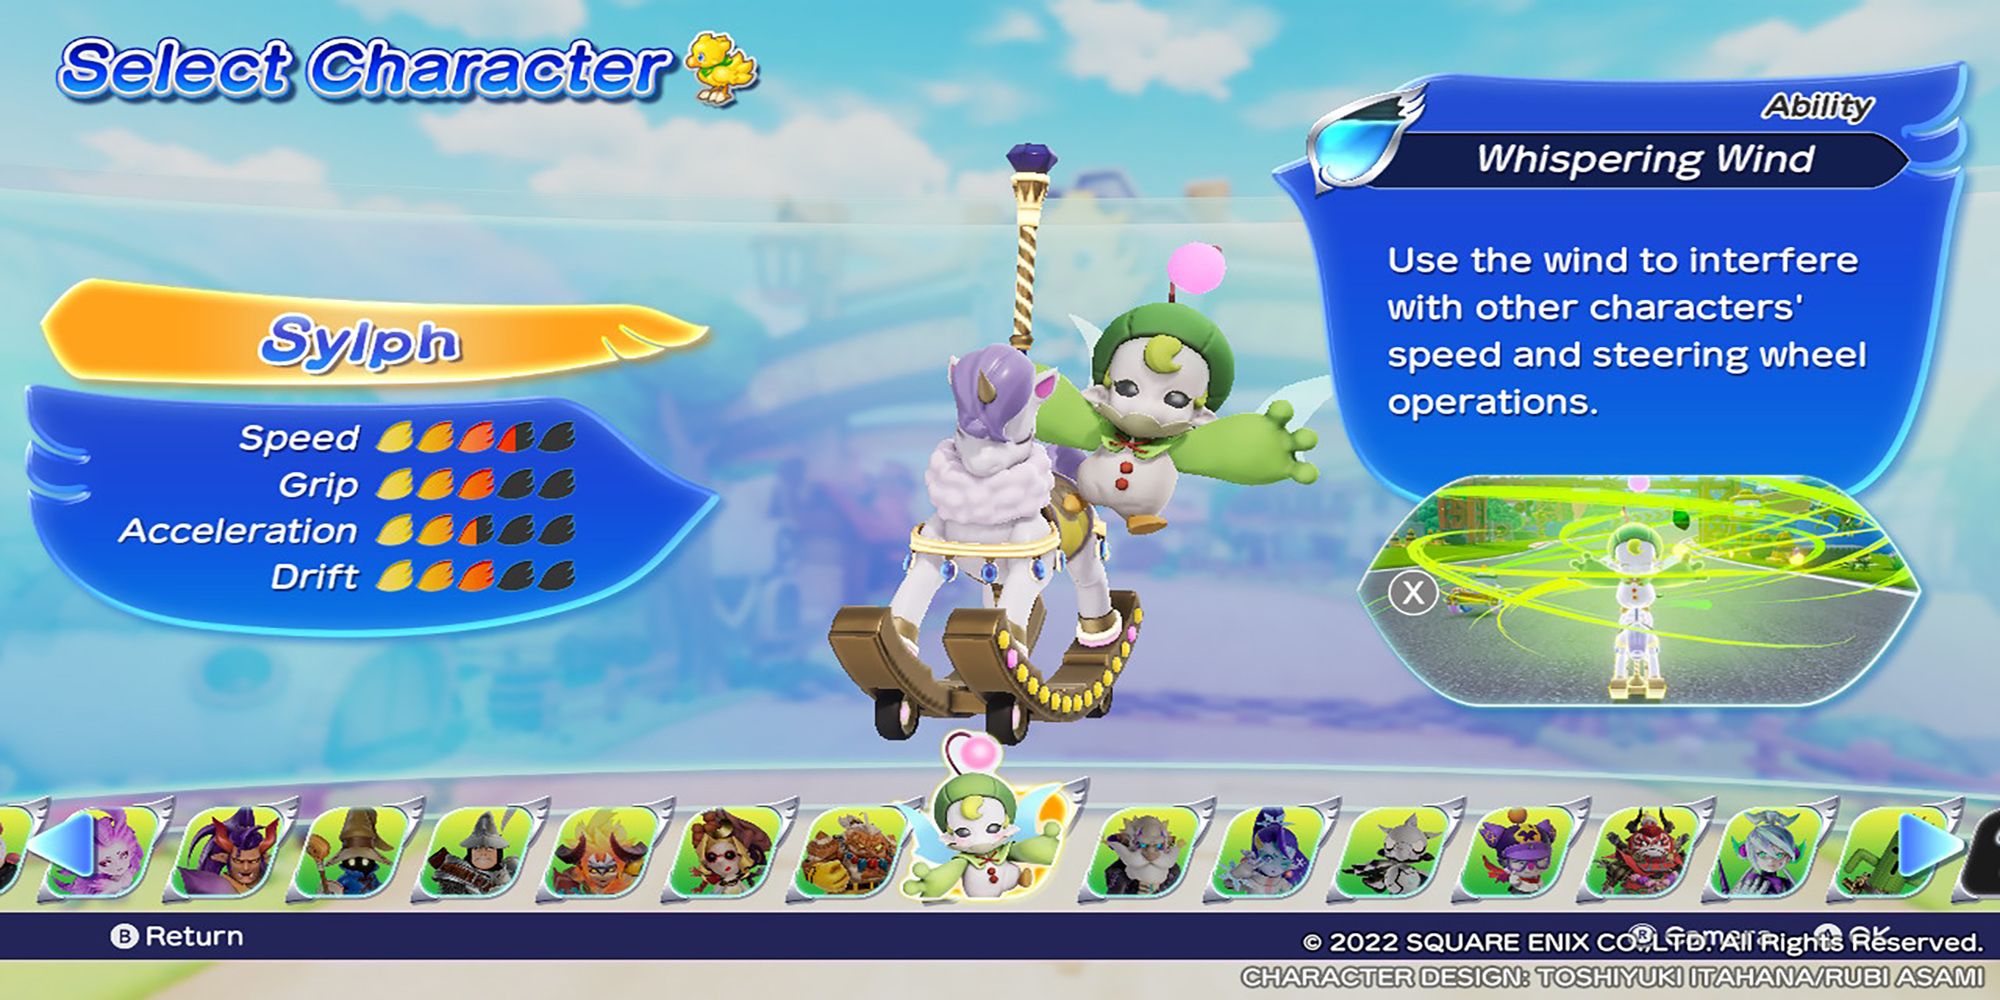 Sylph's character model, along with her stats and abilities, in the Select Character menu. Chocobo GP.